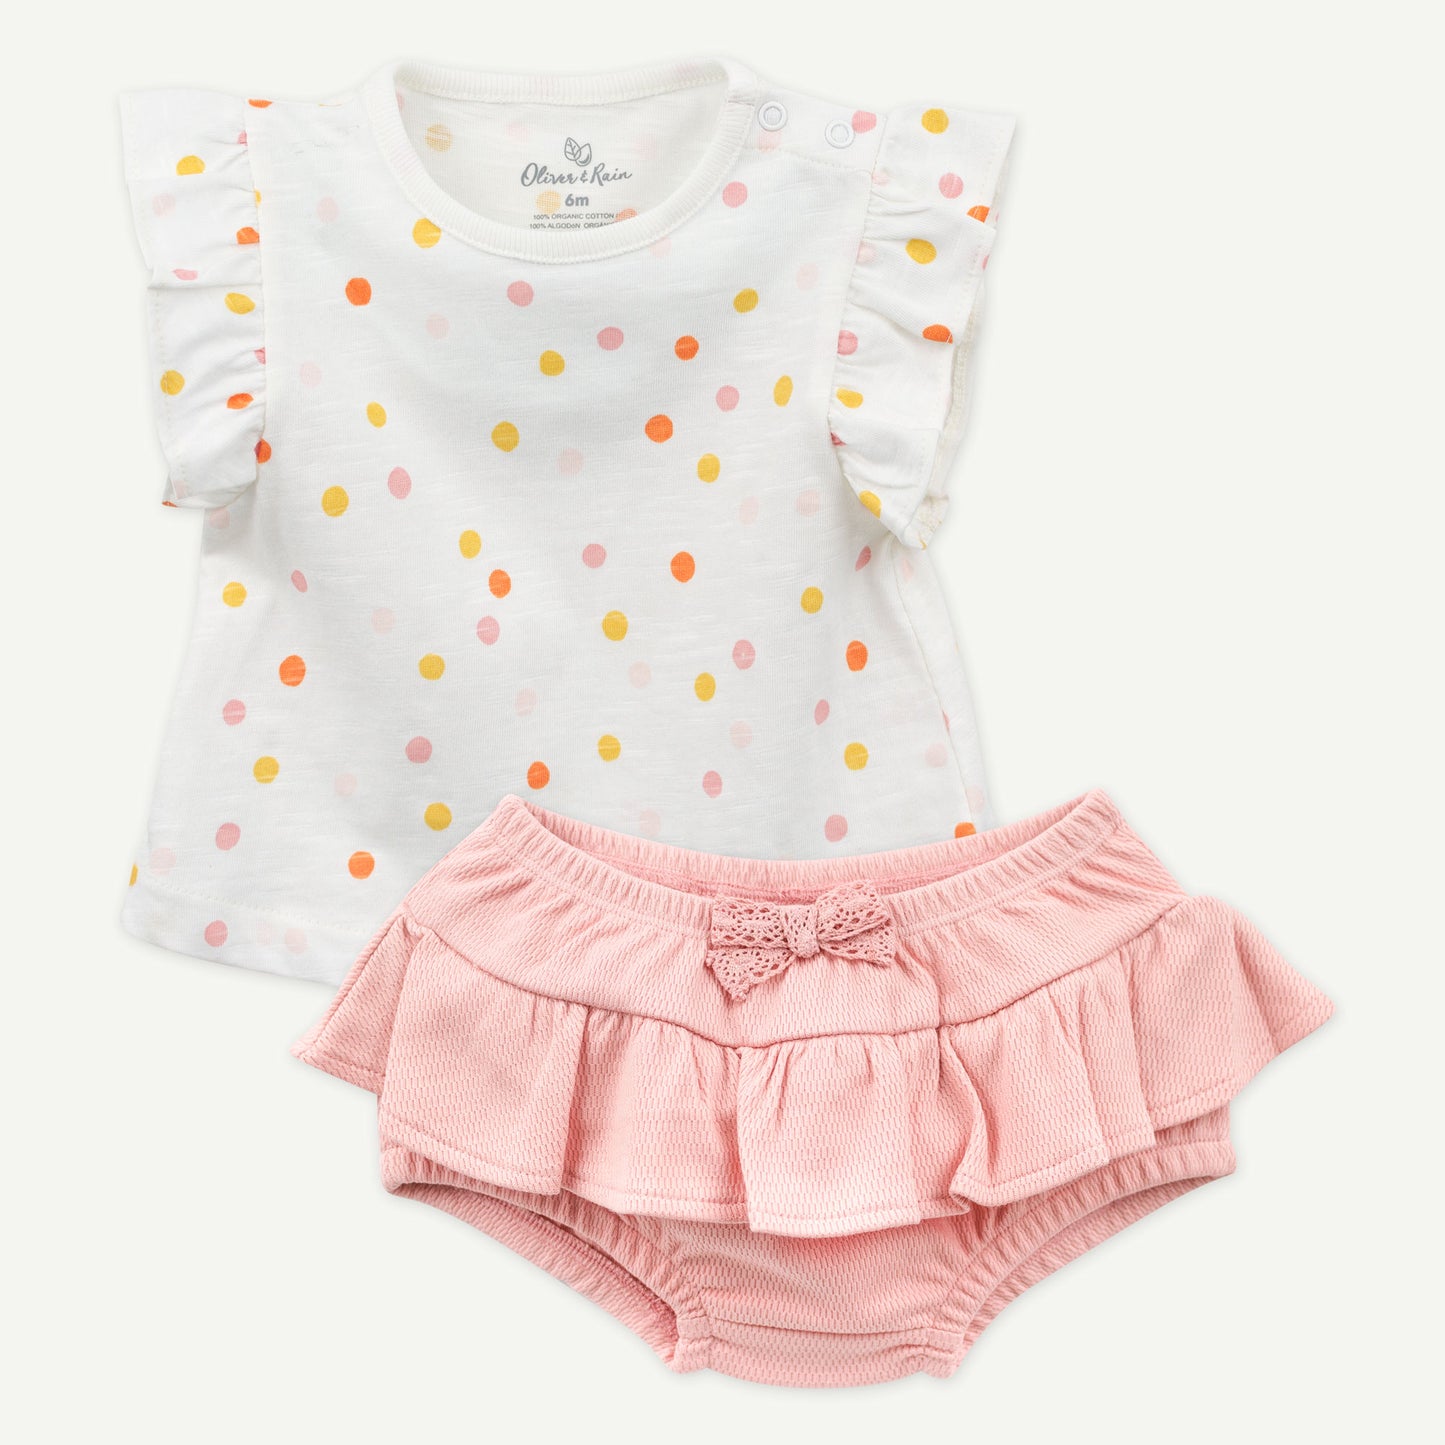 2-Piece Outfit in Pink Polka Dot Print